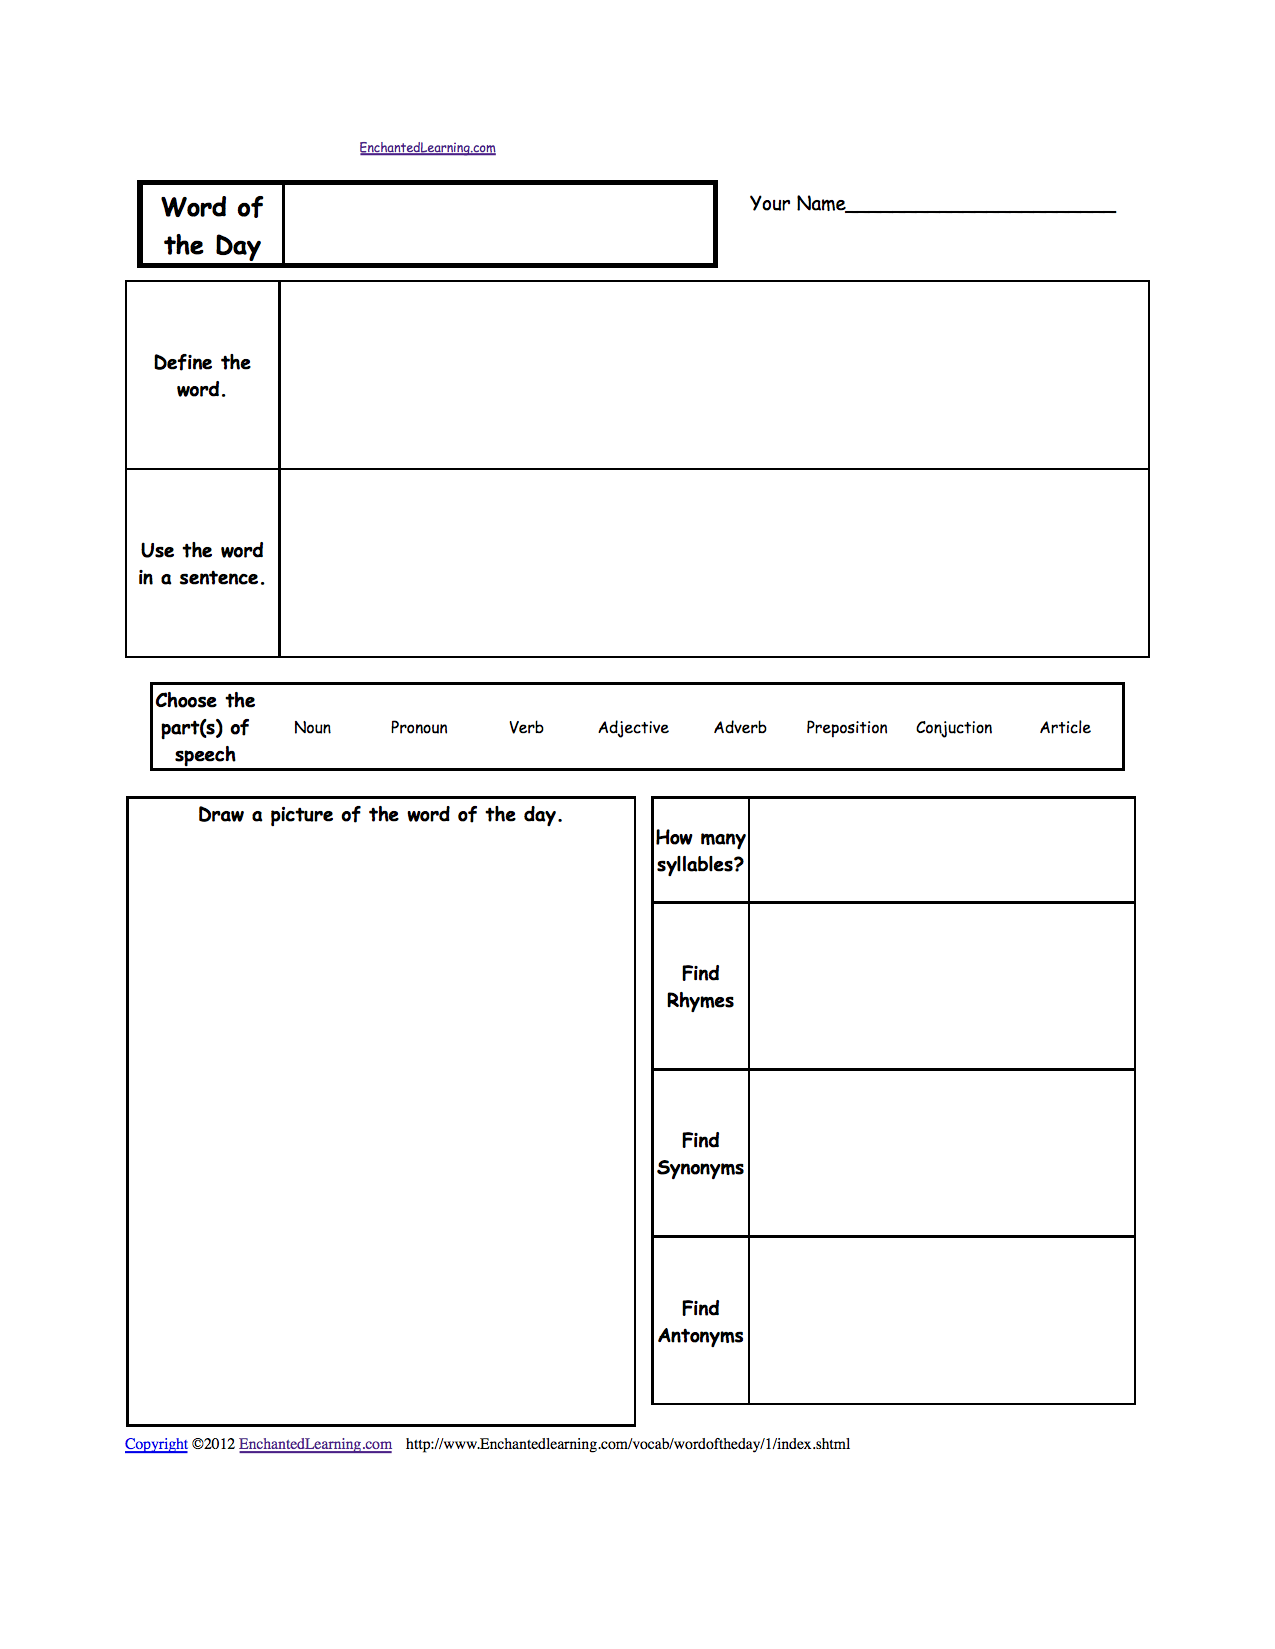 Word of the Day Worksheets - EnchantedLearning.com Throughout Vocabulary Words Worksheet Template